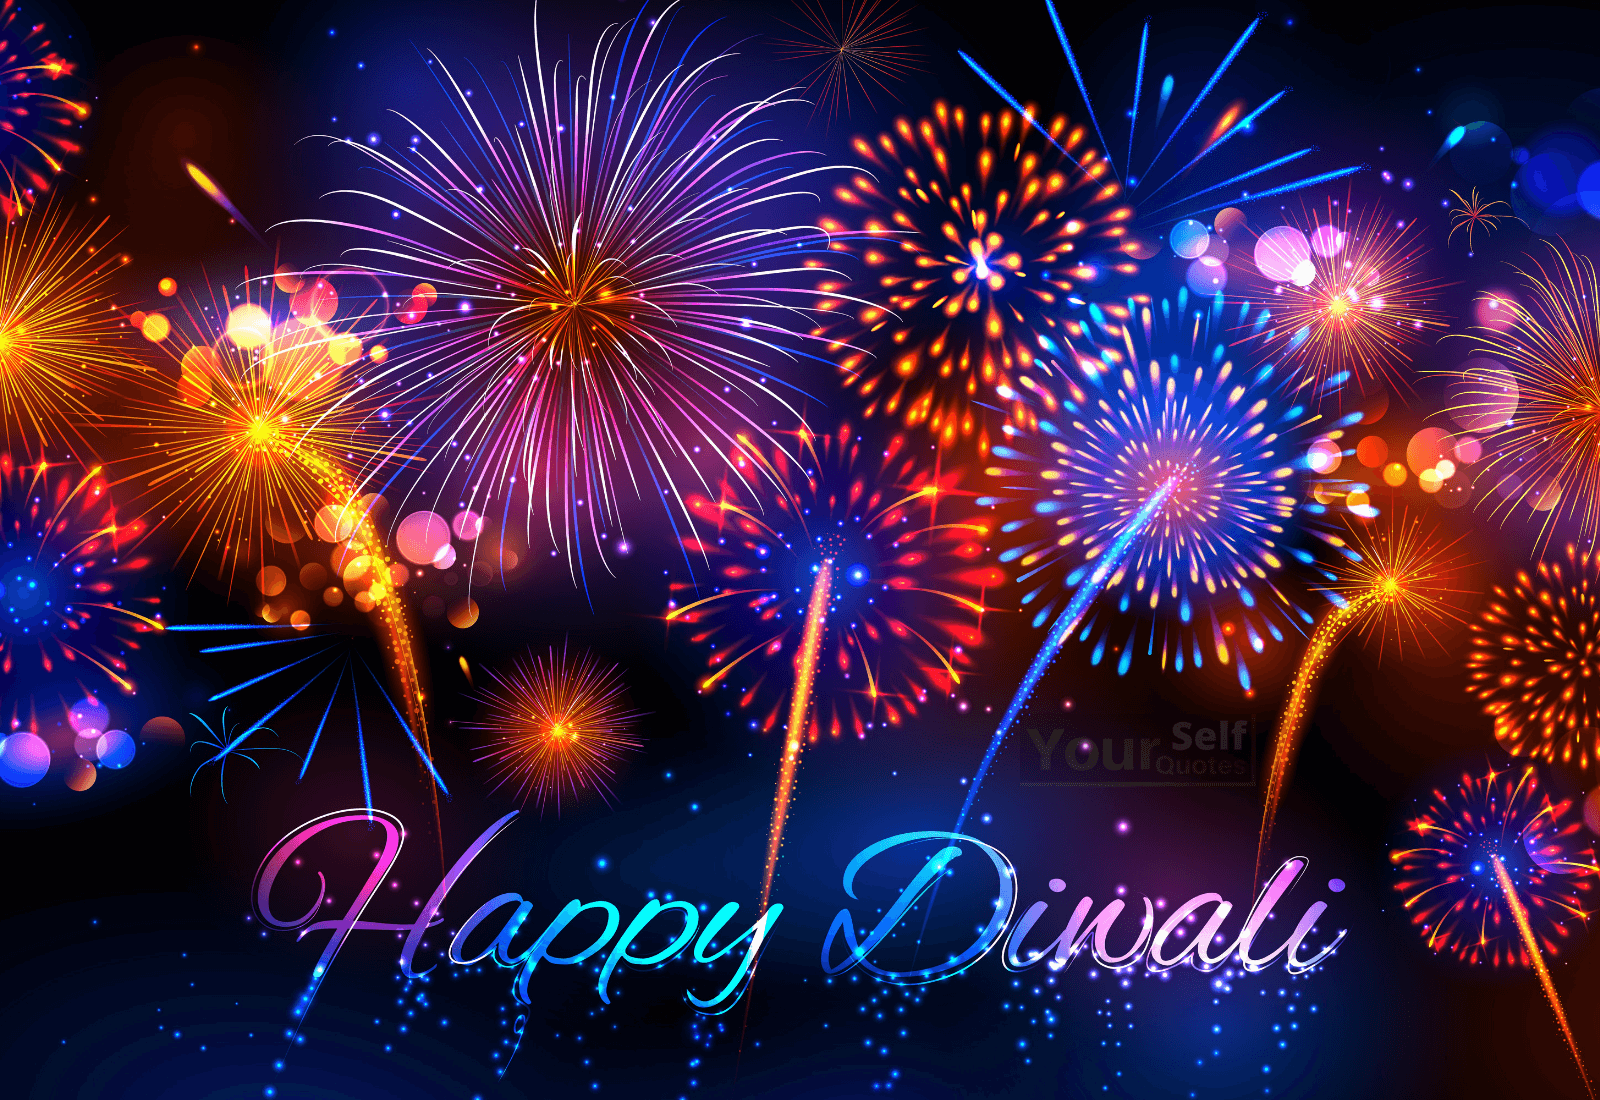 Happy Diwali Images Photos - Happy New Year Ka , HD Wallpaper & Backgrounds